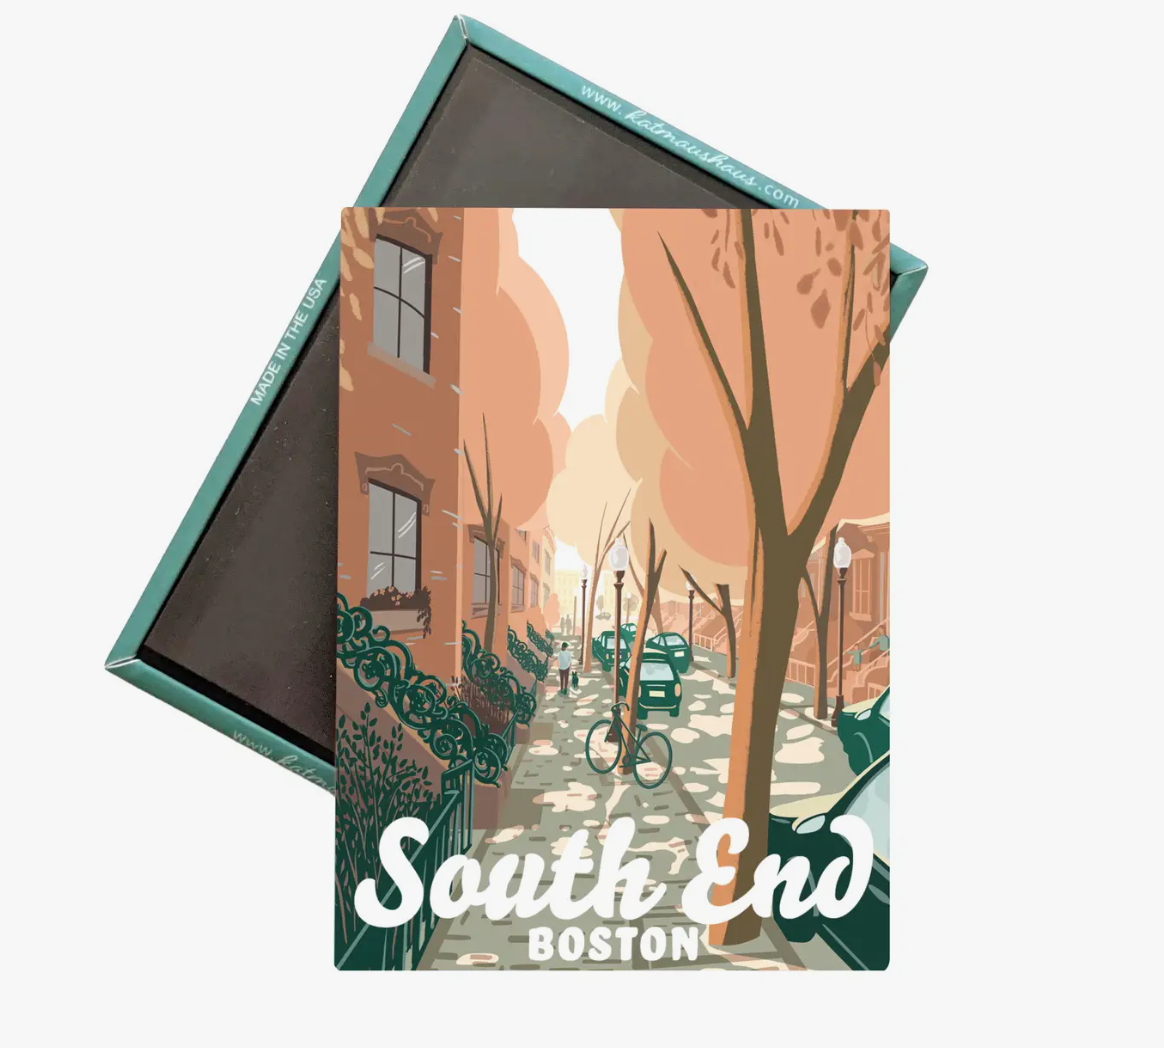 South End, Boston Magnet (Summer Edition)